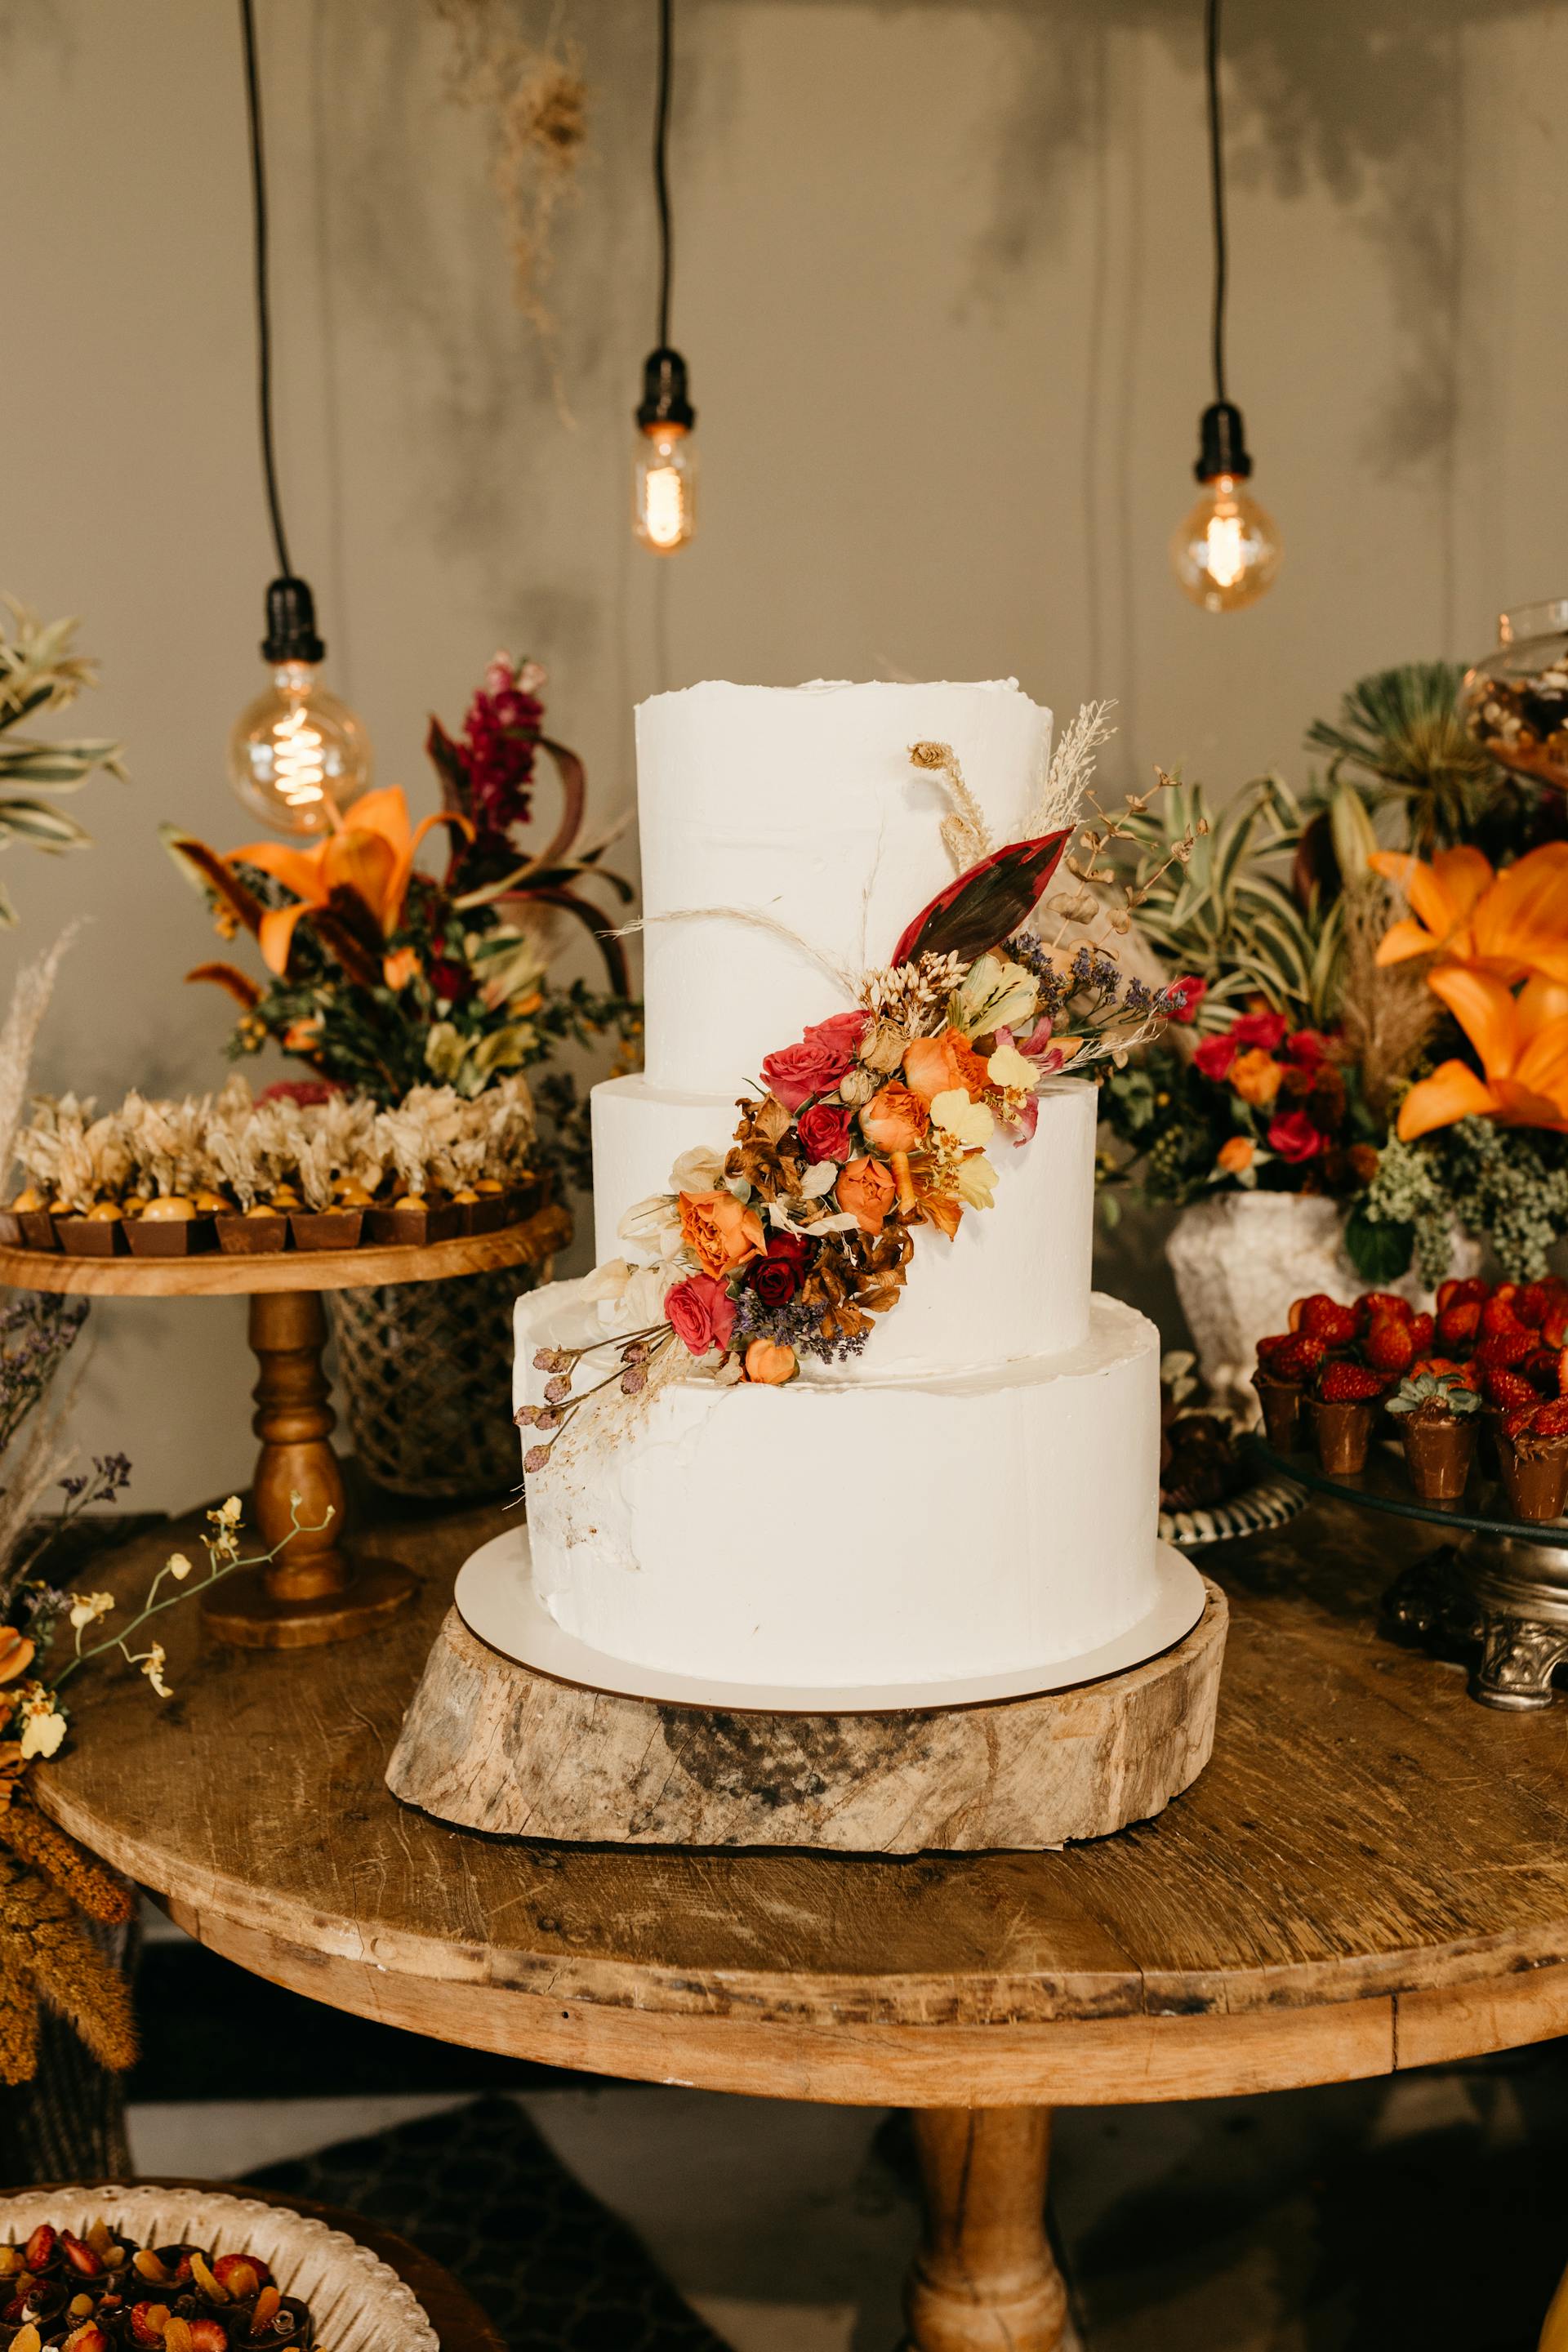 A wedding cake on a dessert table | Source: Pexels